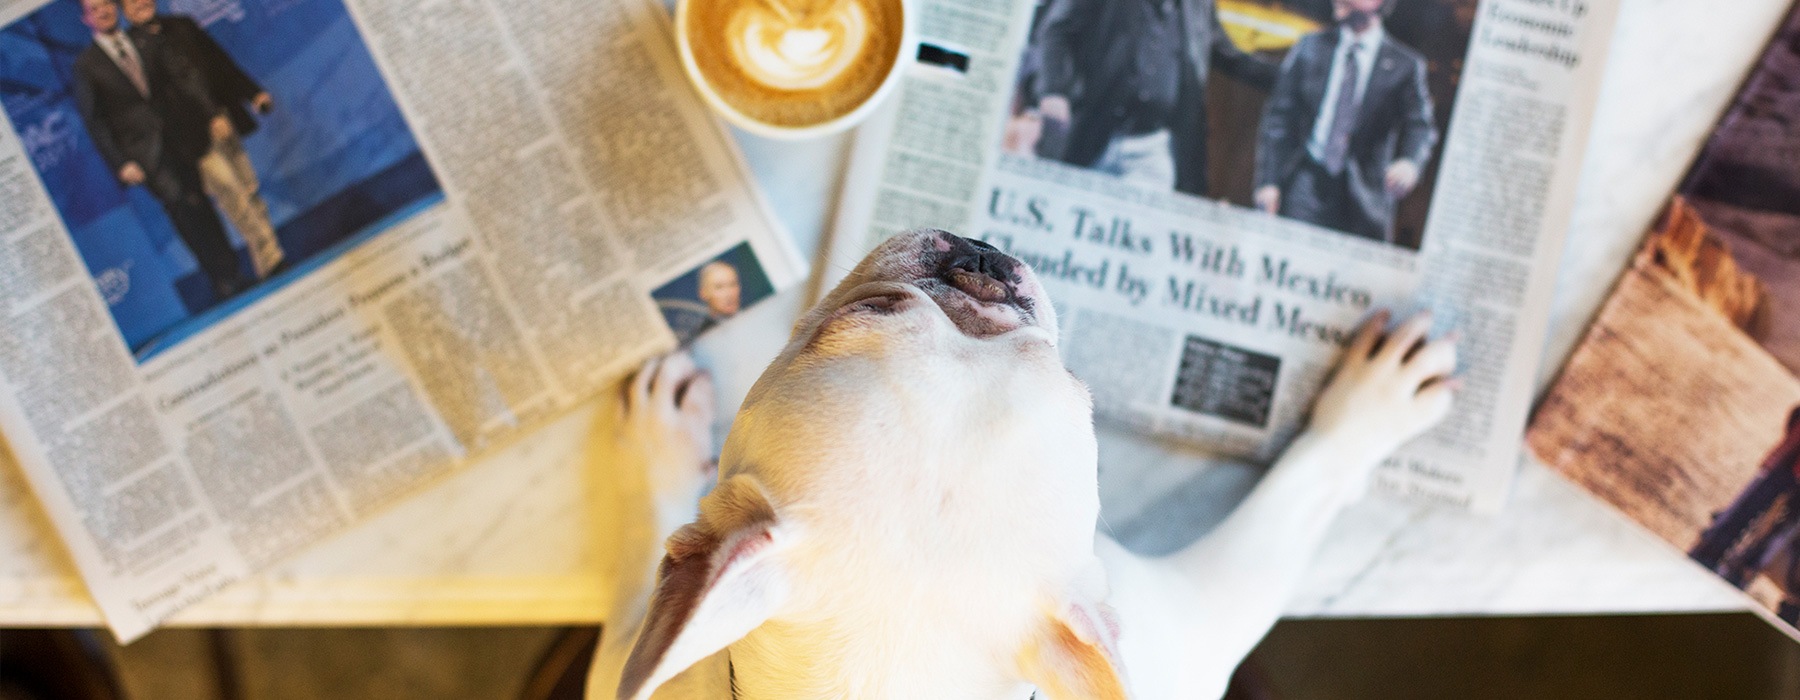 lifestyle image of a dog sitting in front of newspaper and beside a coffee